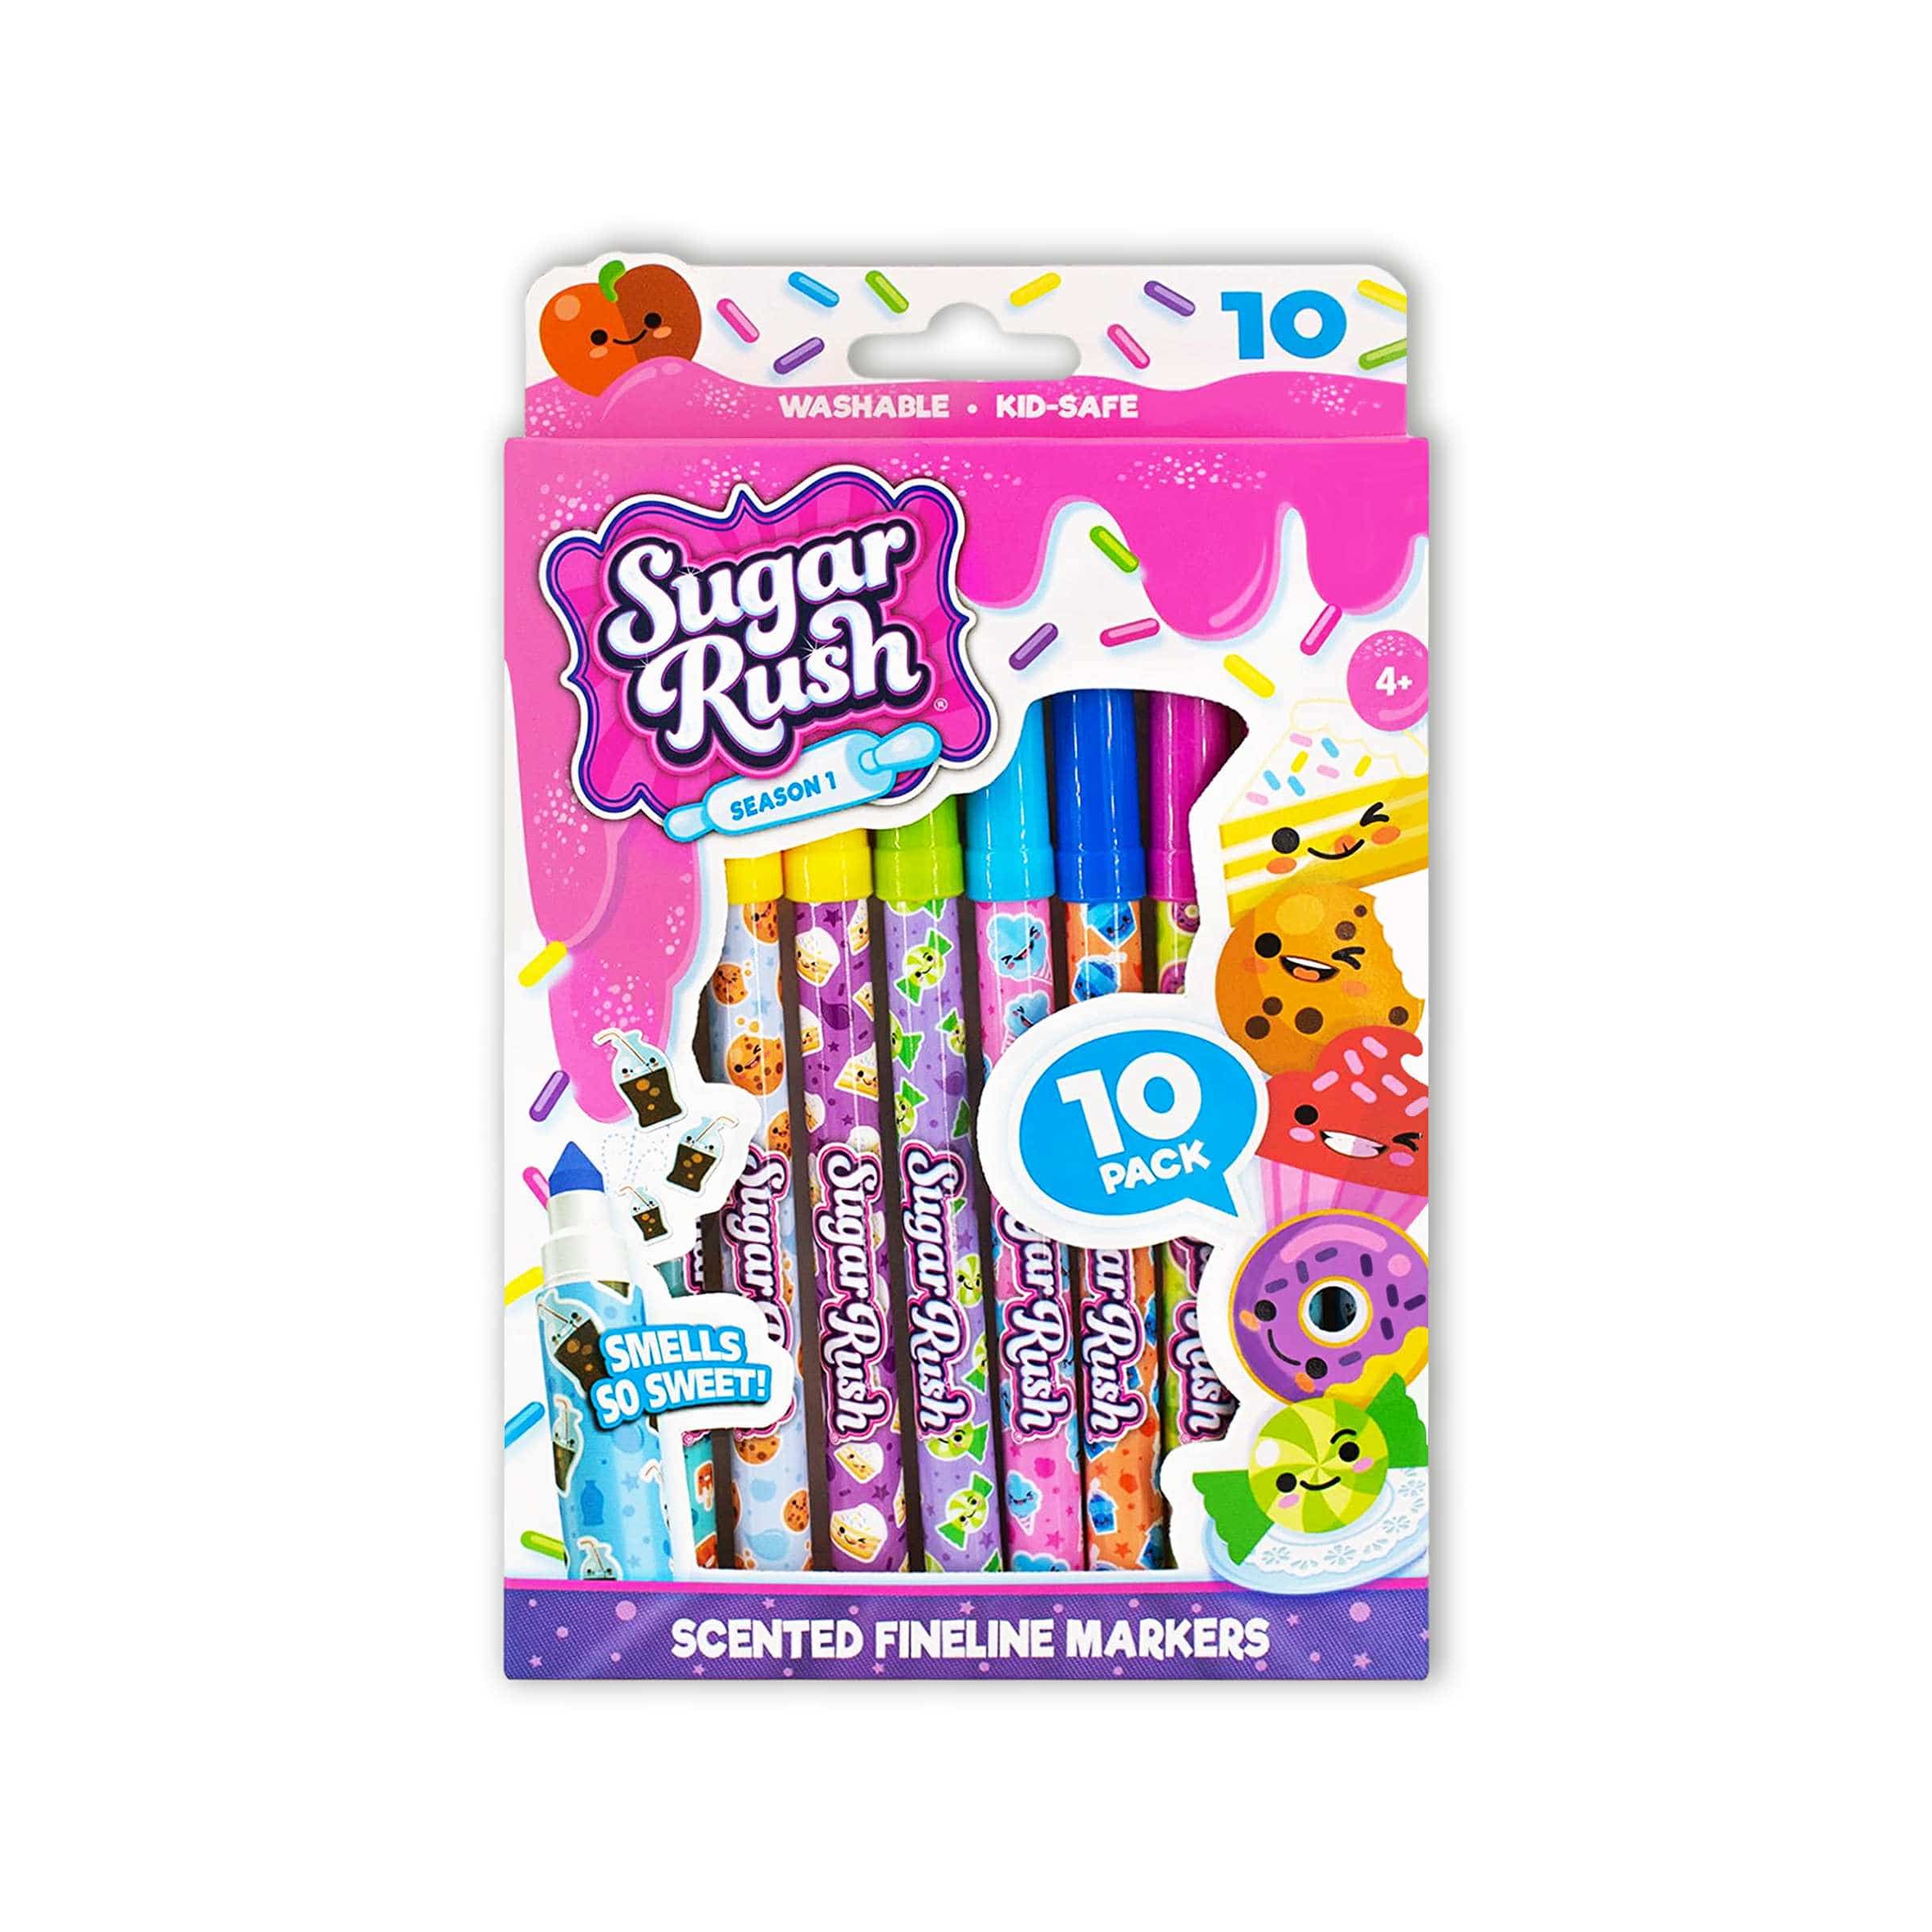 Scentos® and Sugar Rush® Scented Products – ShopScentos